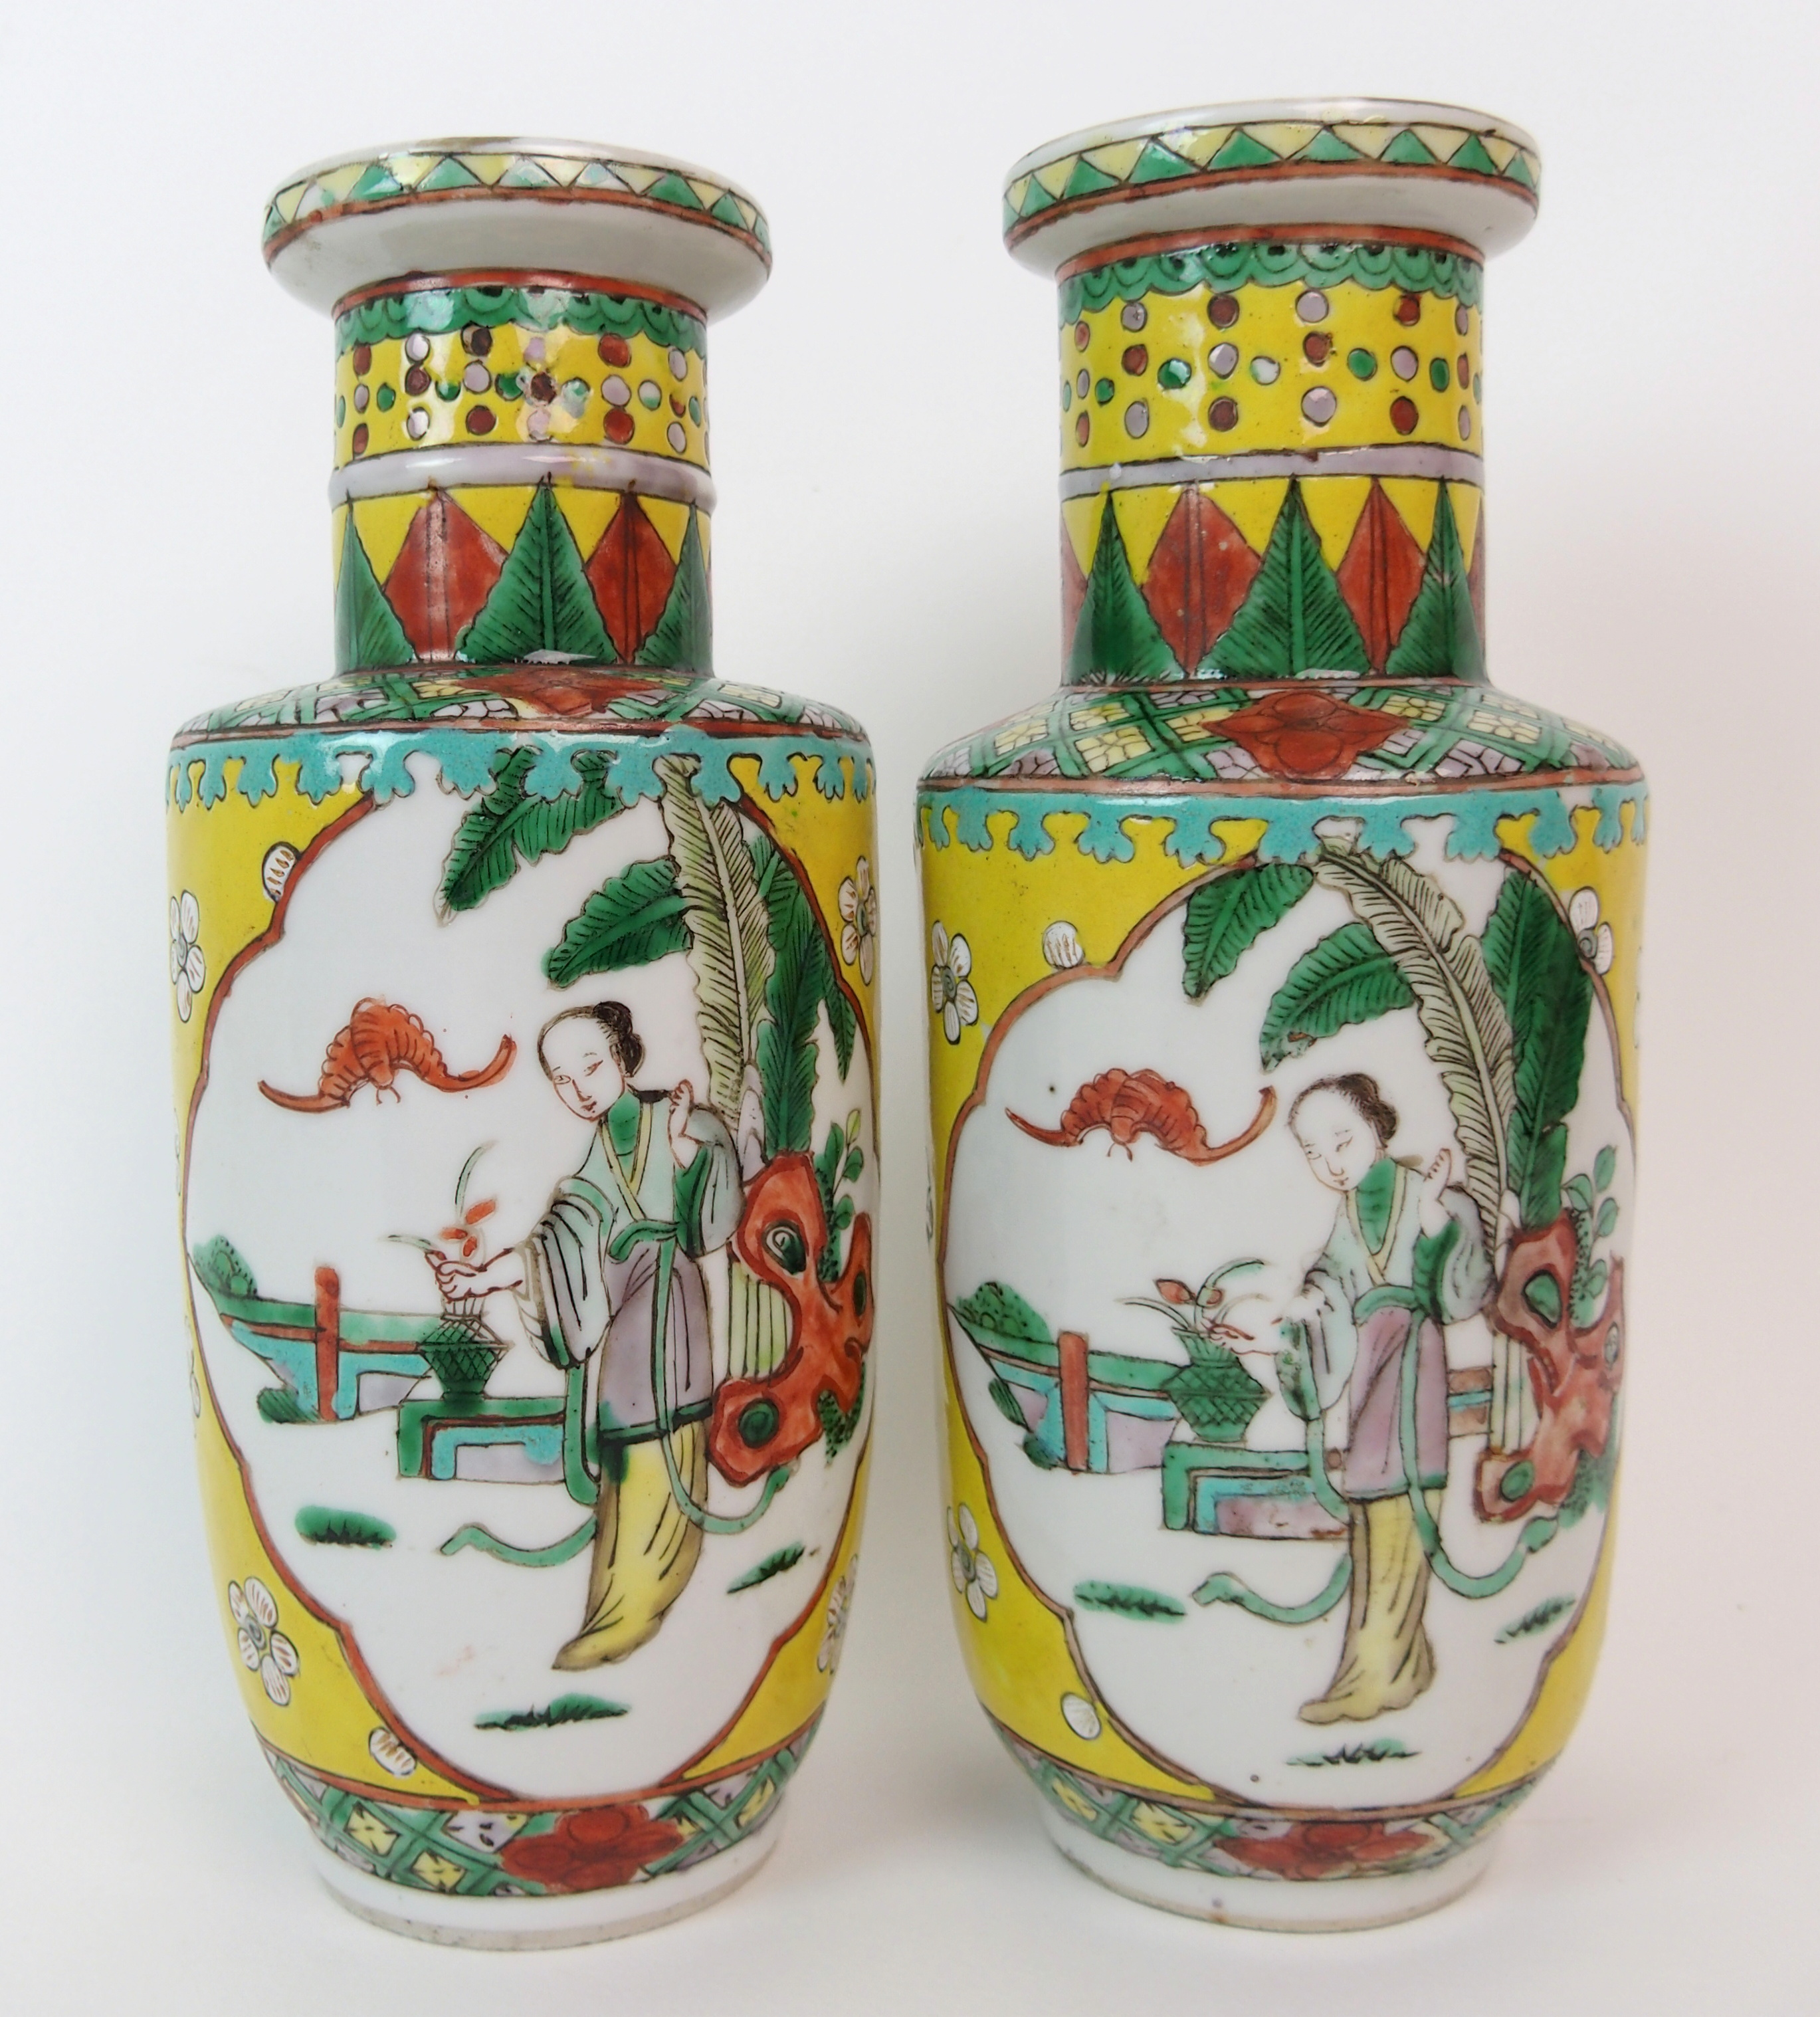 A pair of Chinese famille verte vases on a yellow ground, painted with panels of figures in ogival